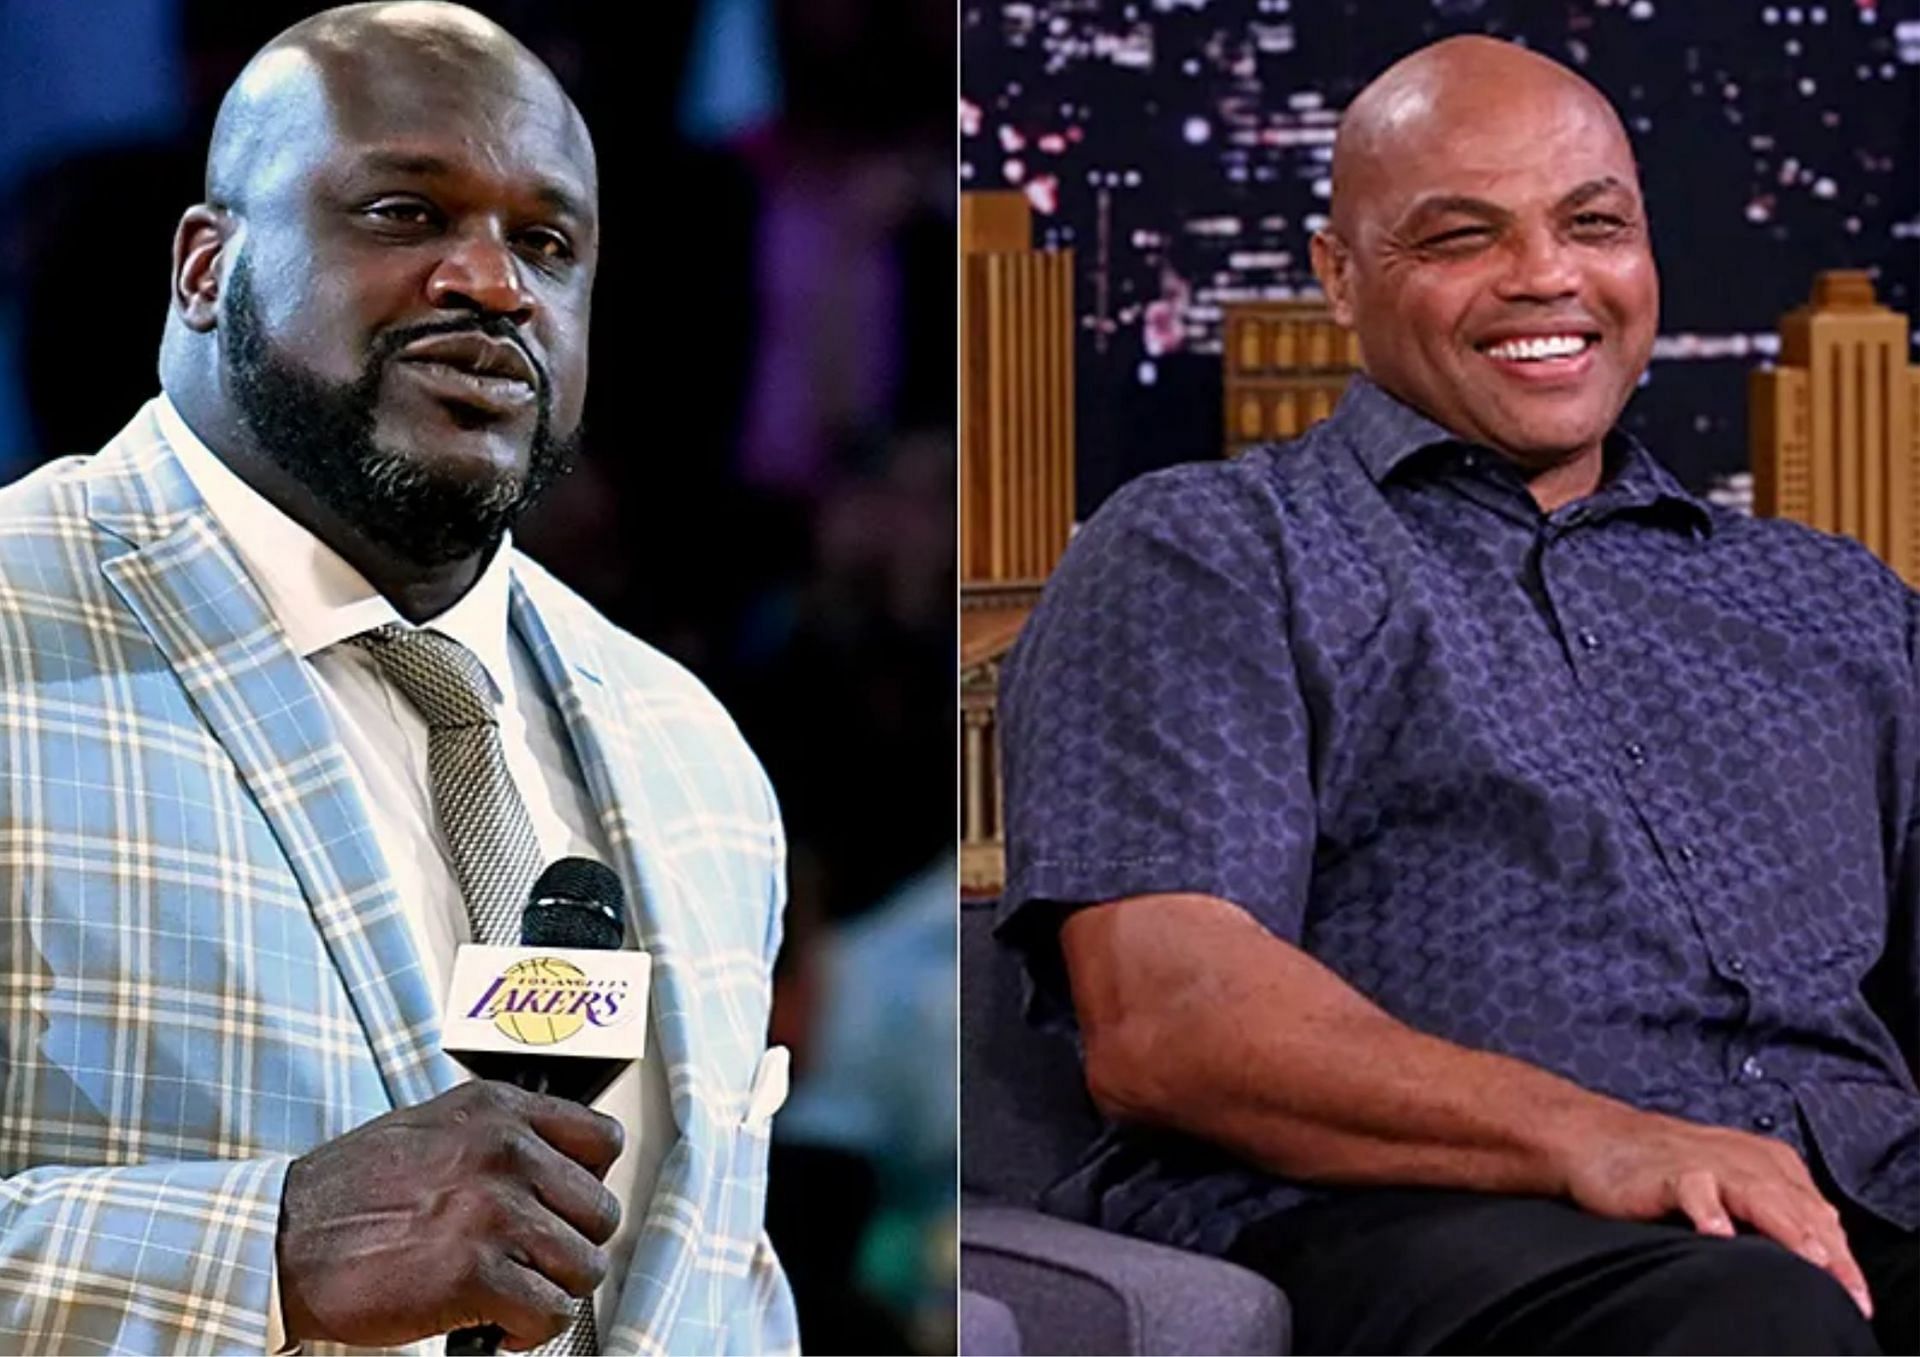 Charles Barkley and Shaquille O